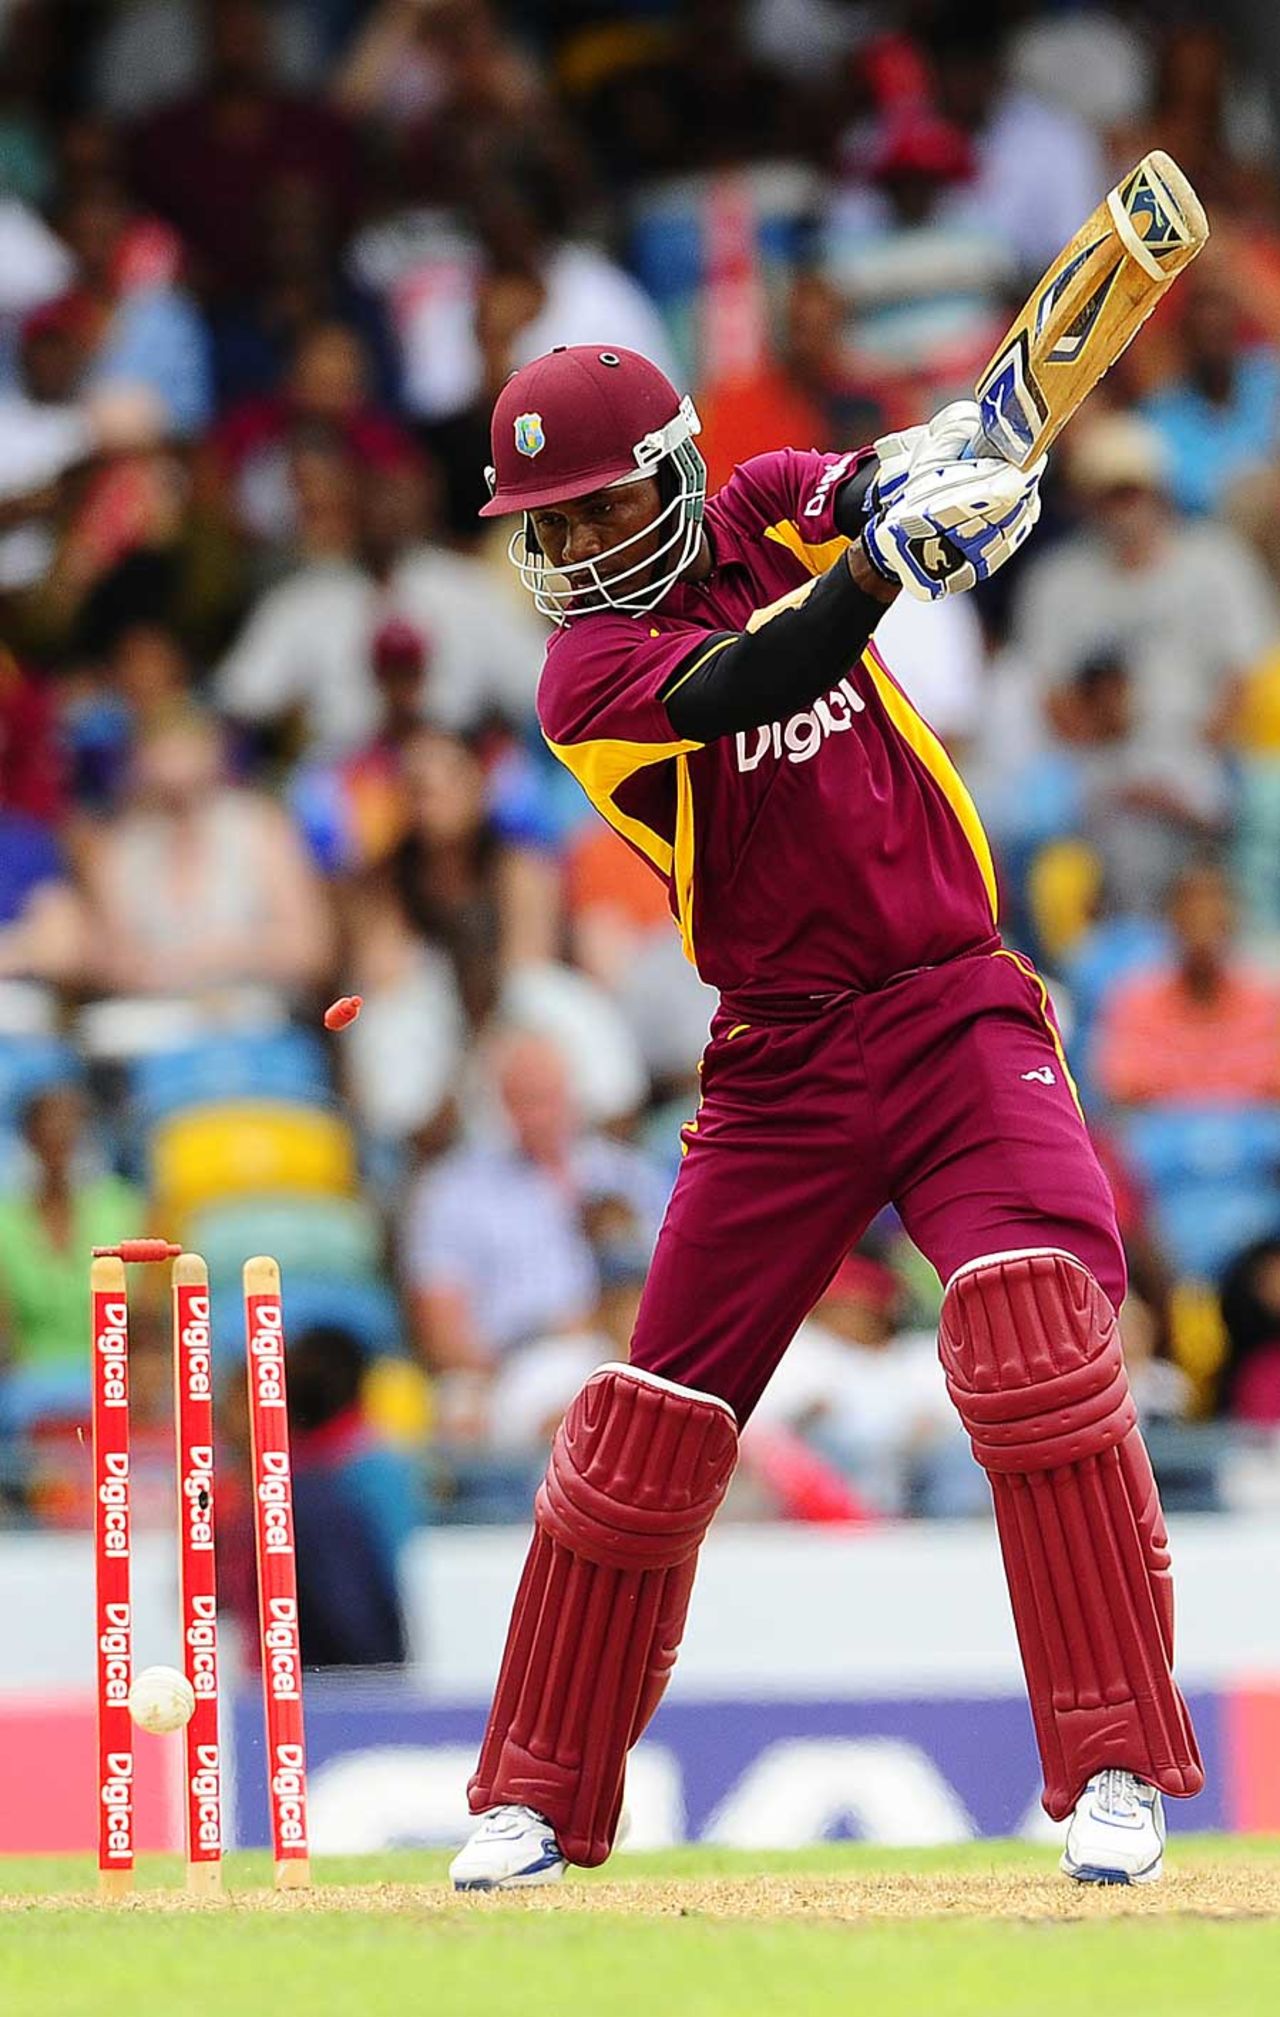 Marlon Samuels again struggled before chopping into his stumps, West Indies v Pakistan, 3rd ODI, Barbados, April 28, 2011